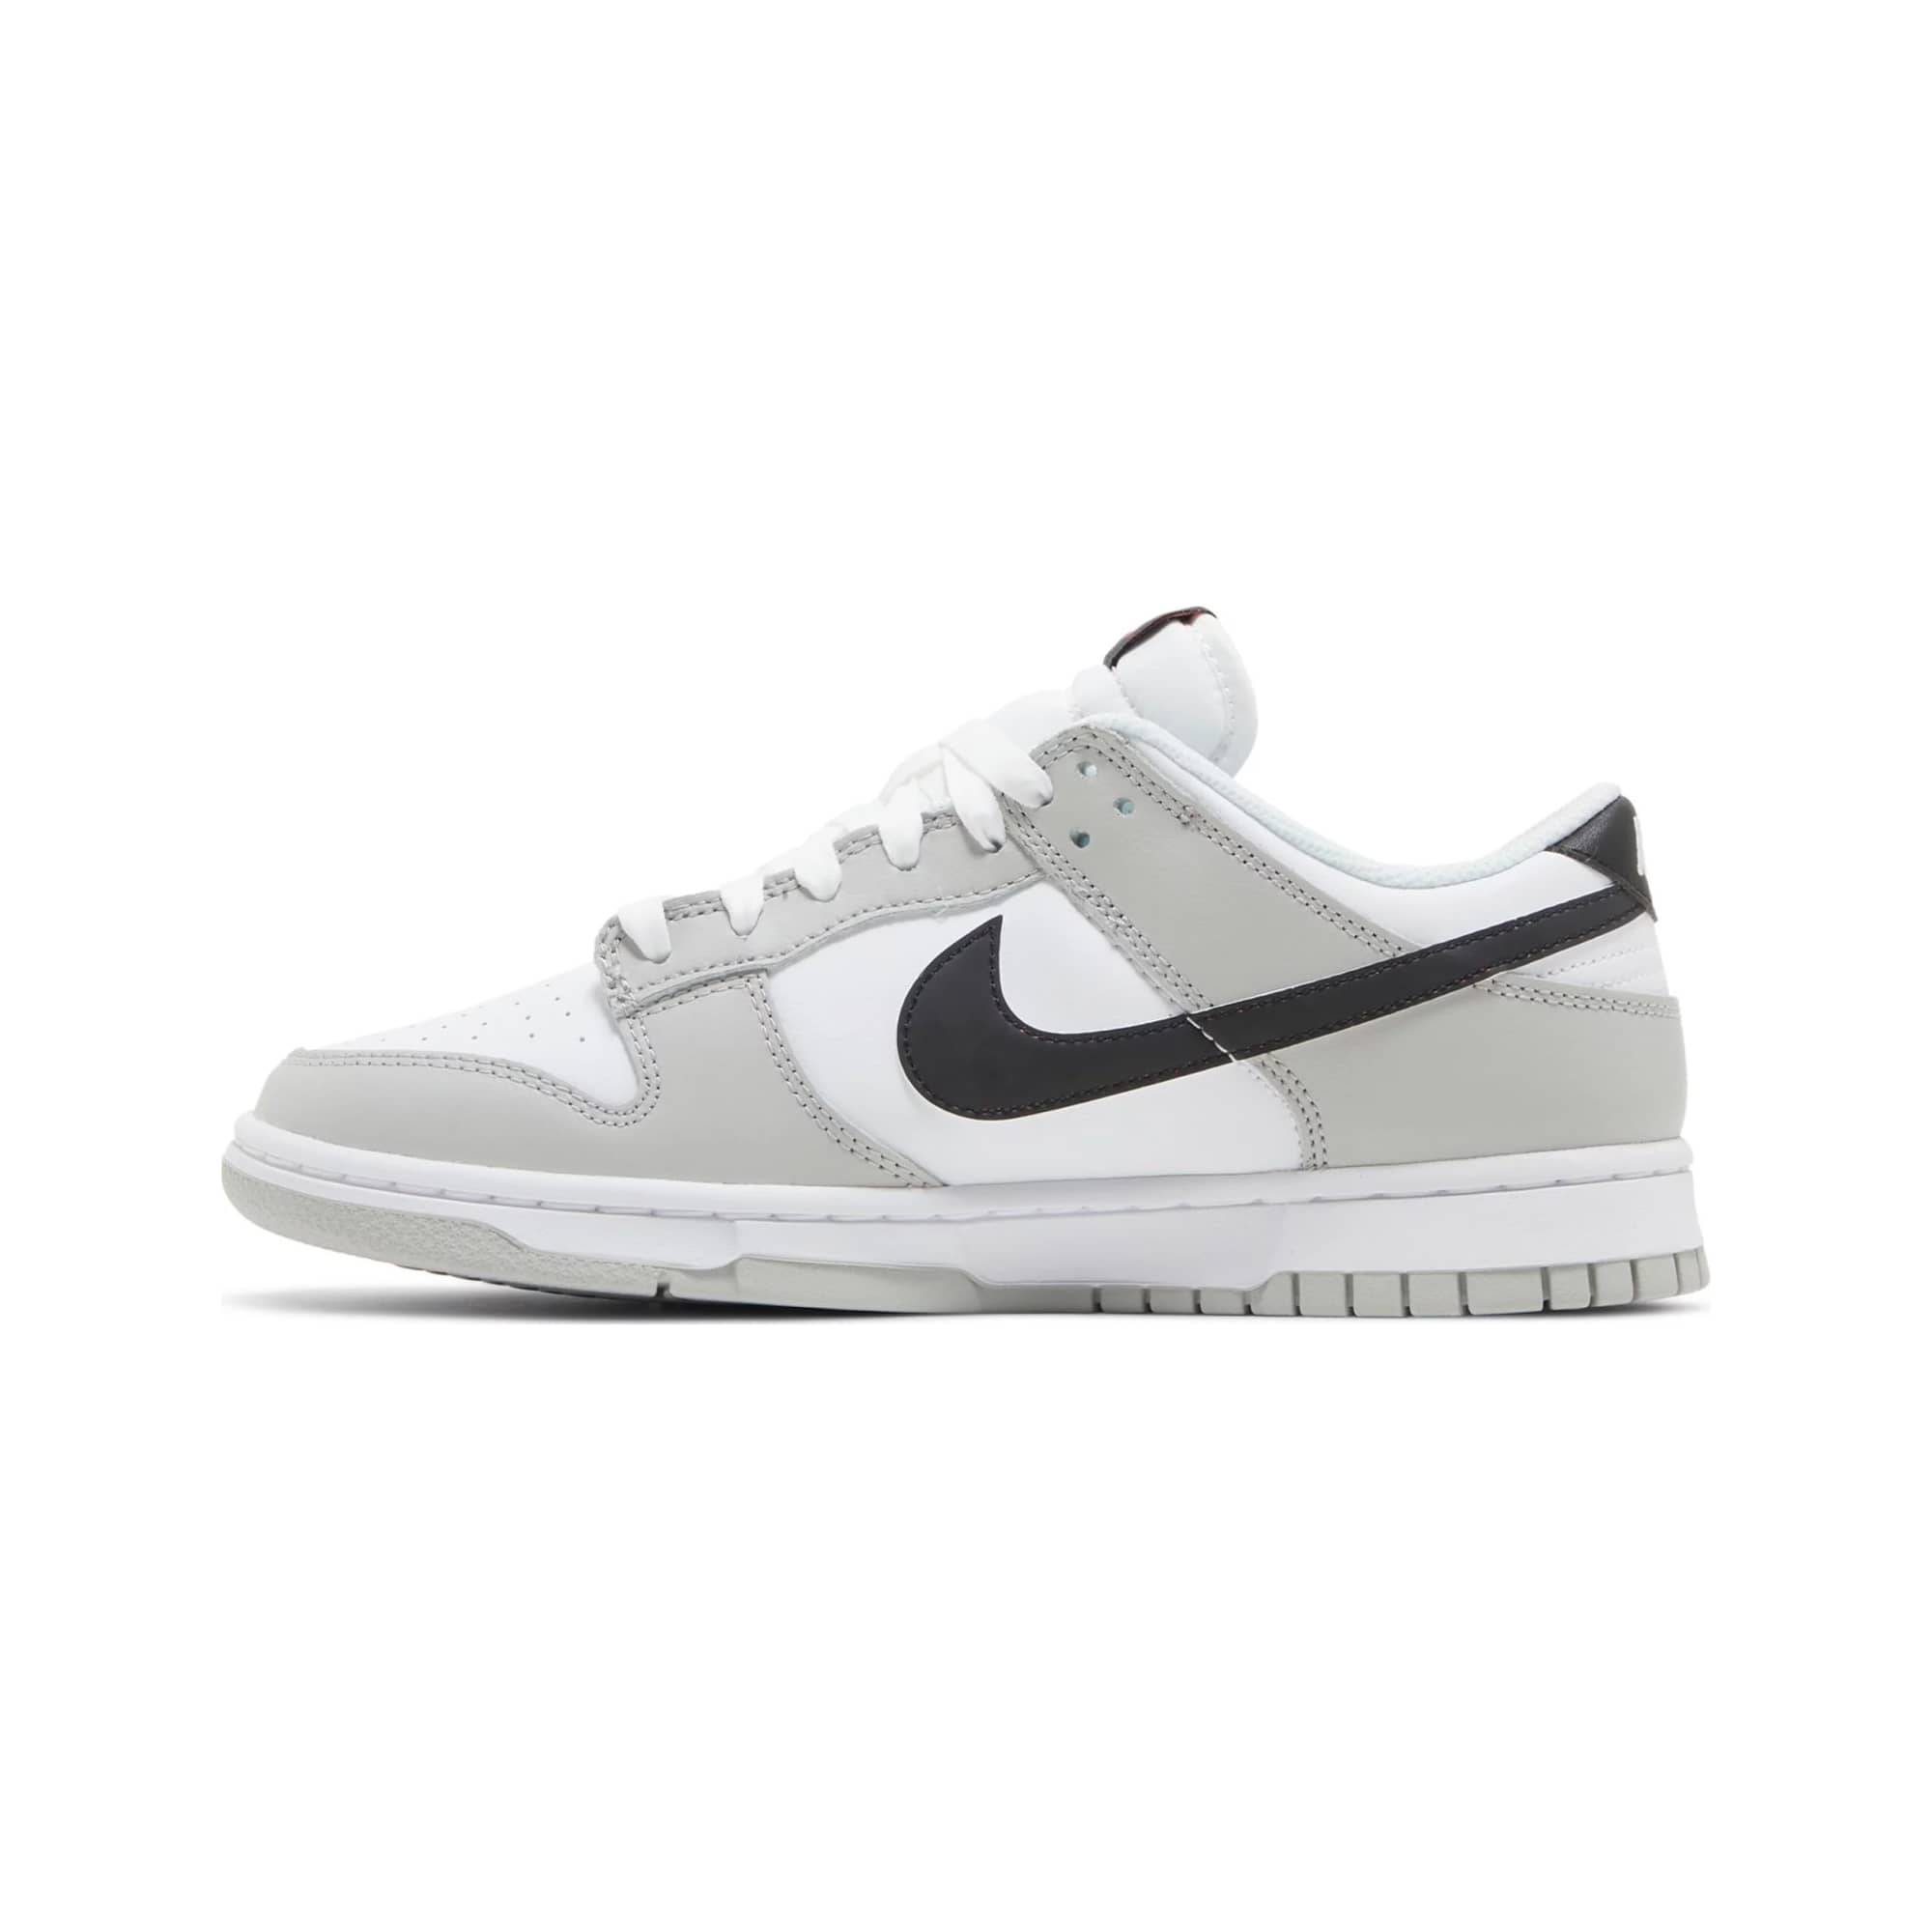 Dunk Low SE 'Lottery Pack - Grey Fog' - Nike - DR9654 001